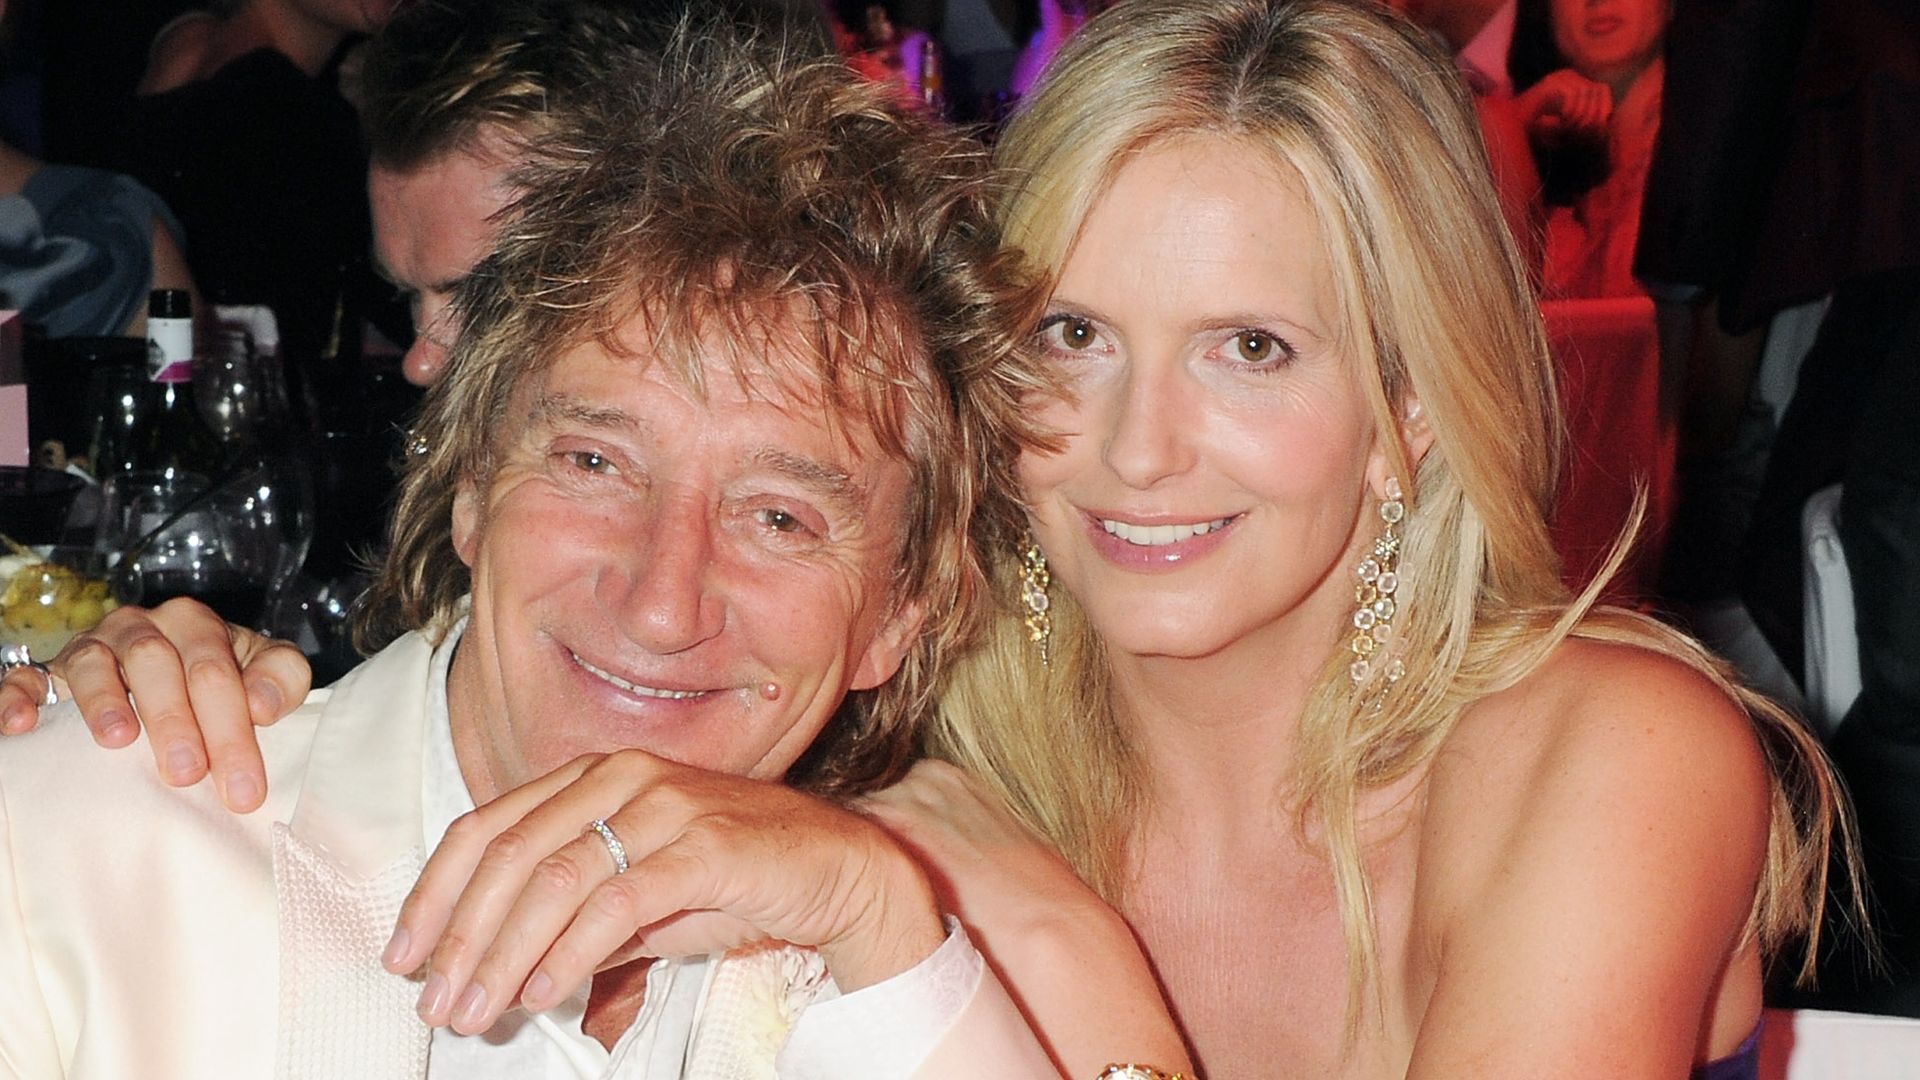 Rod Stewart and Penny Lancaster cuddling at the dinner table